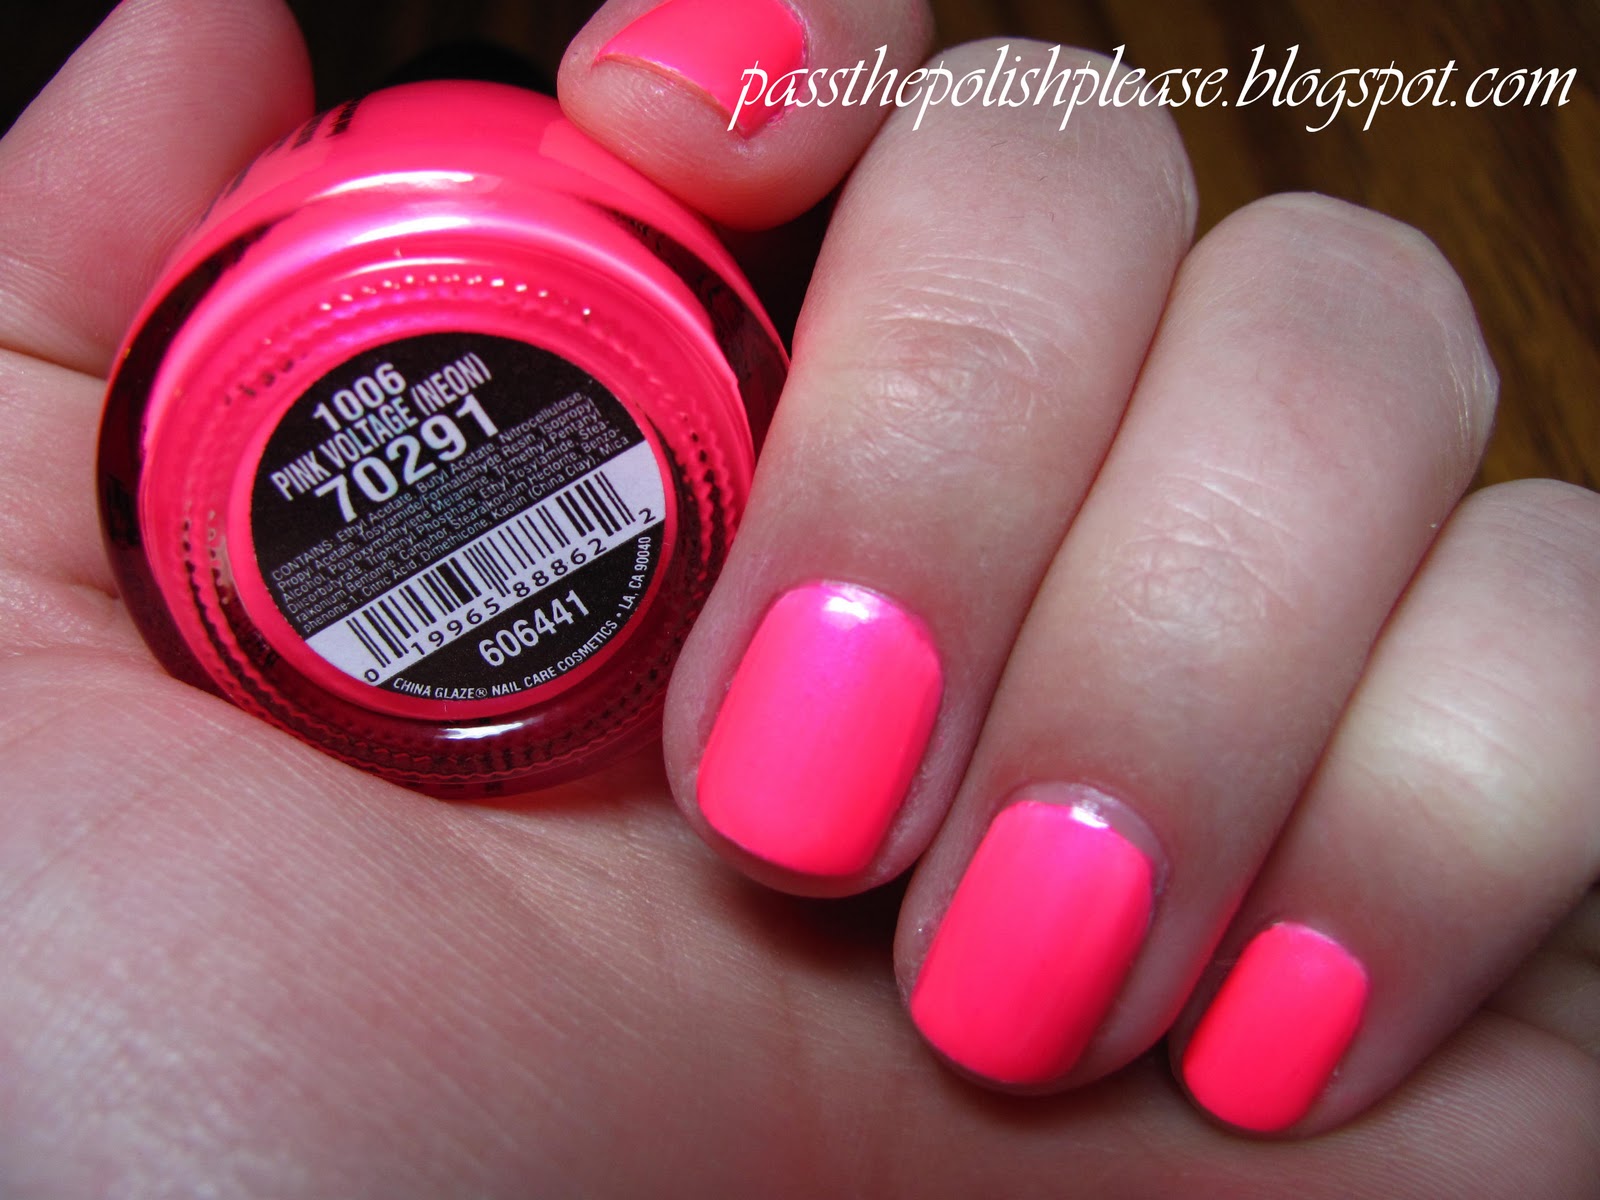 China Glaze Nail Lacquer in "Pink Voltage" - wide 4